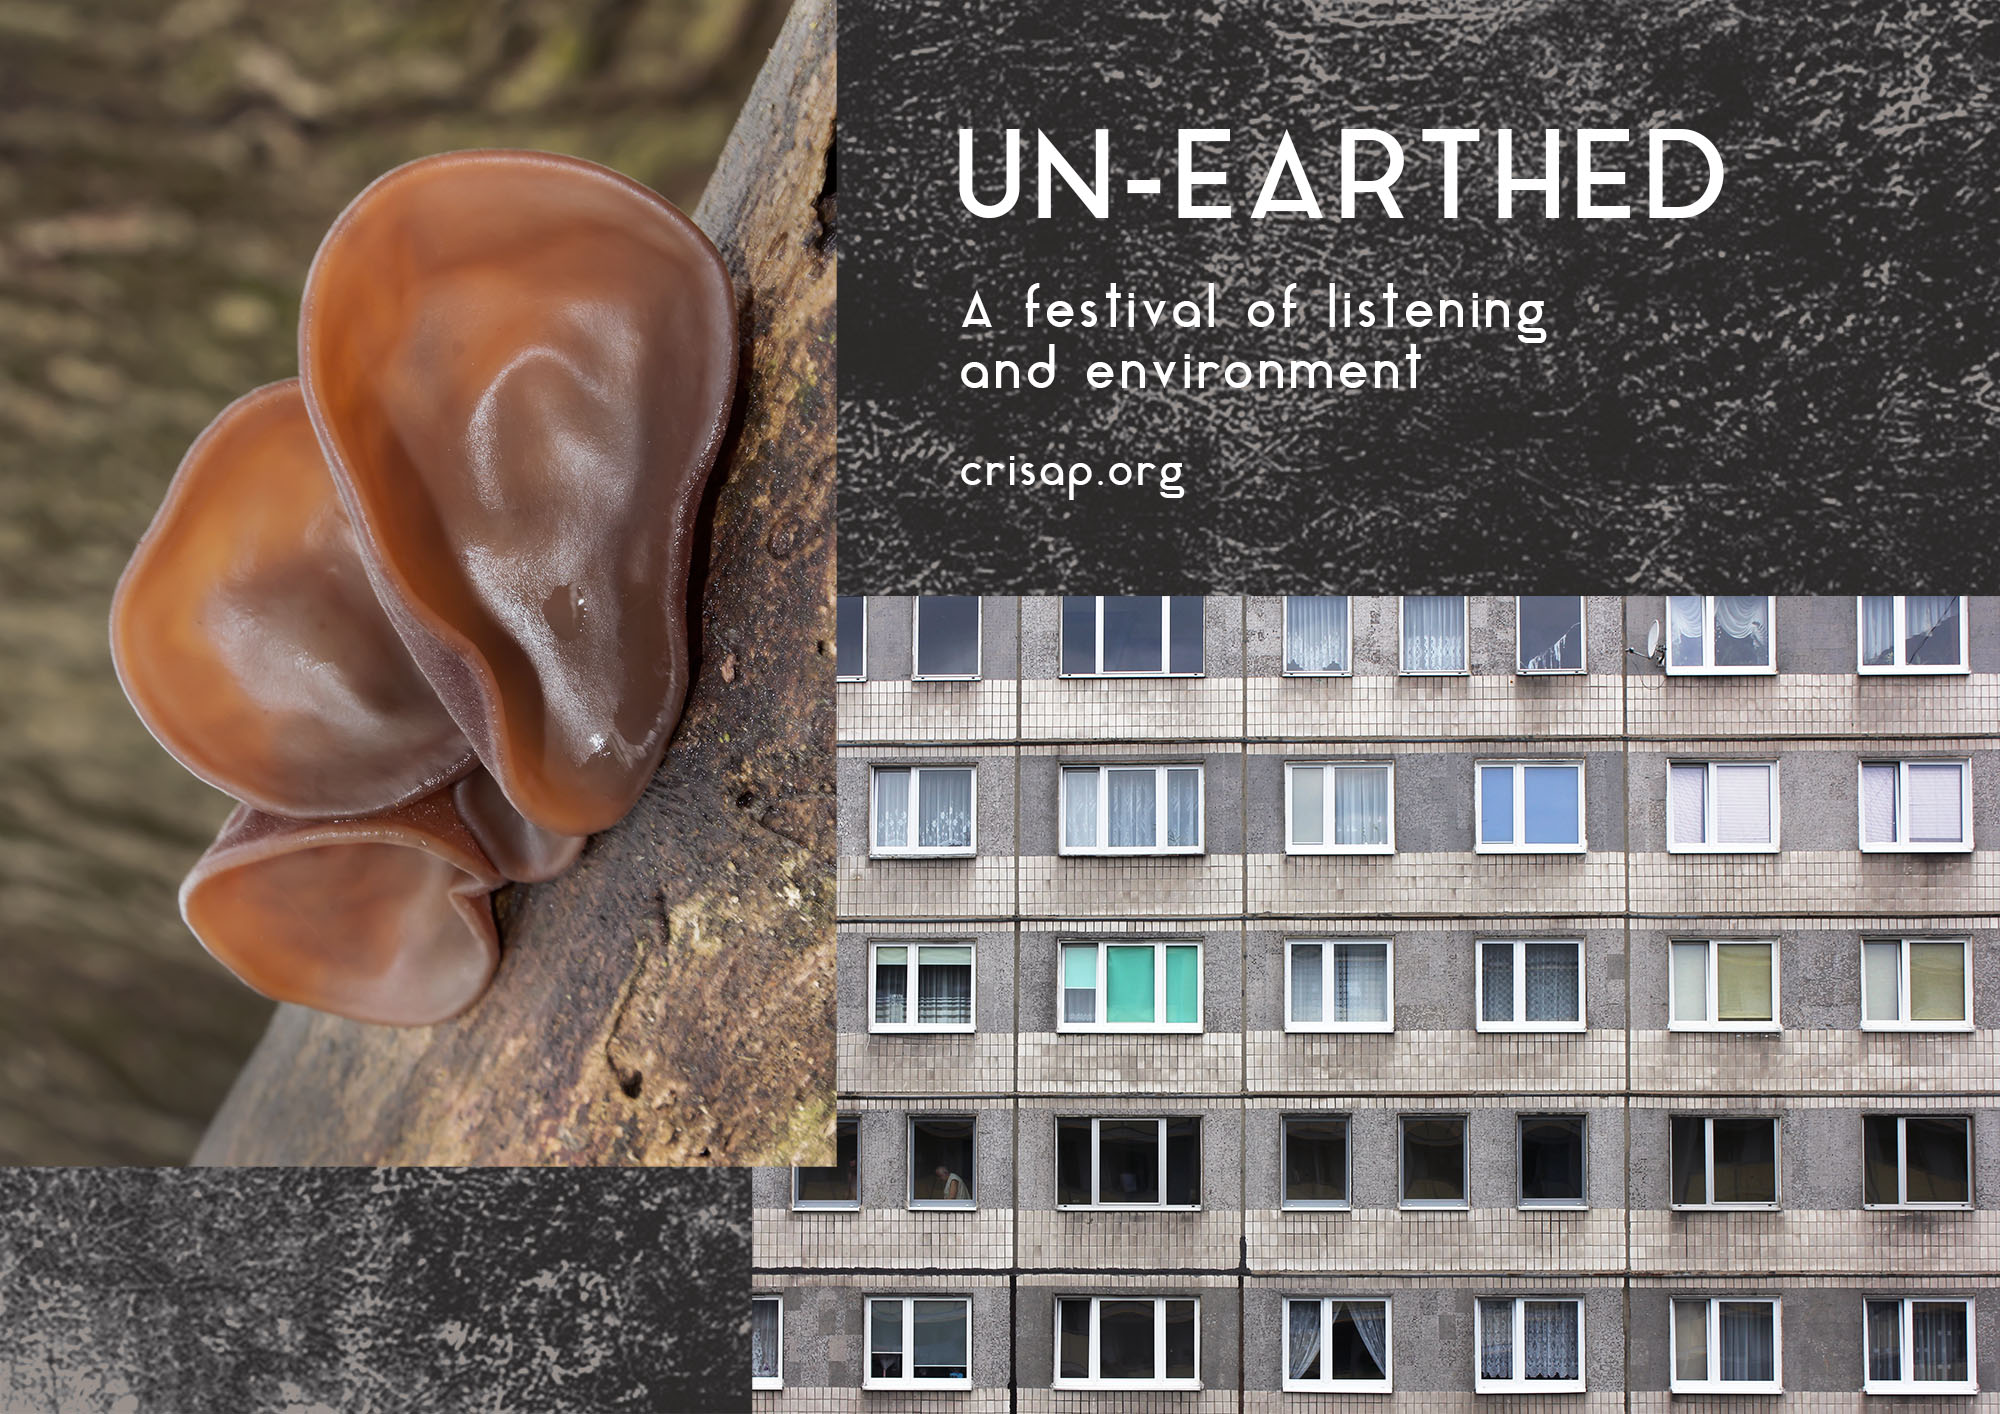 mushrooms that look like ears on a branch, collages with a building facade and text "unearthed a festival of listening and environment, crisap.org"